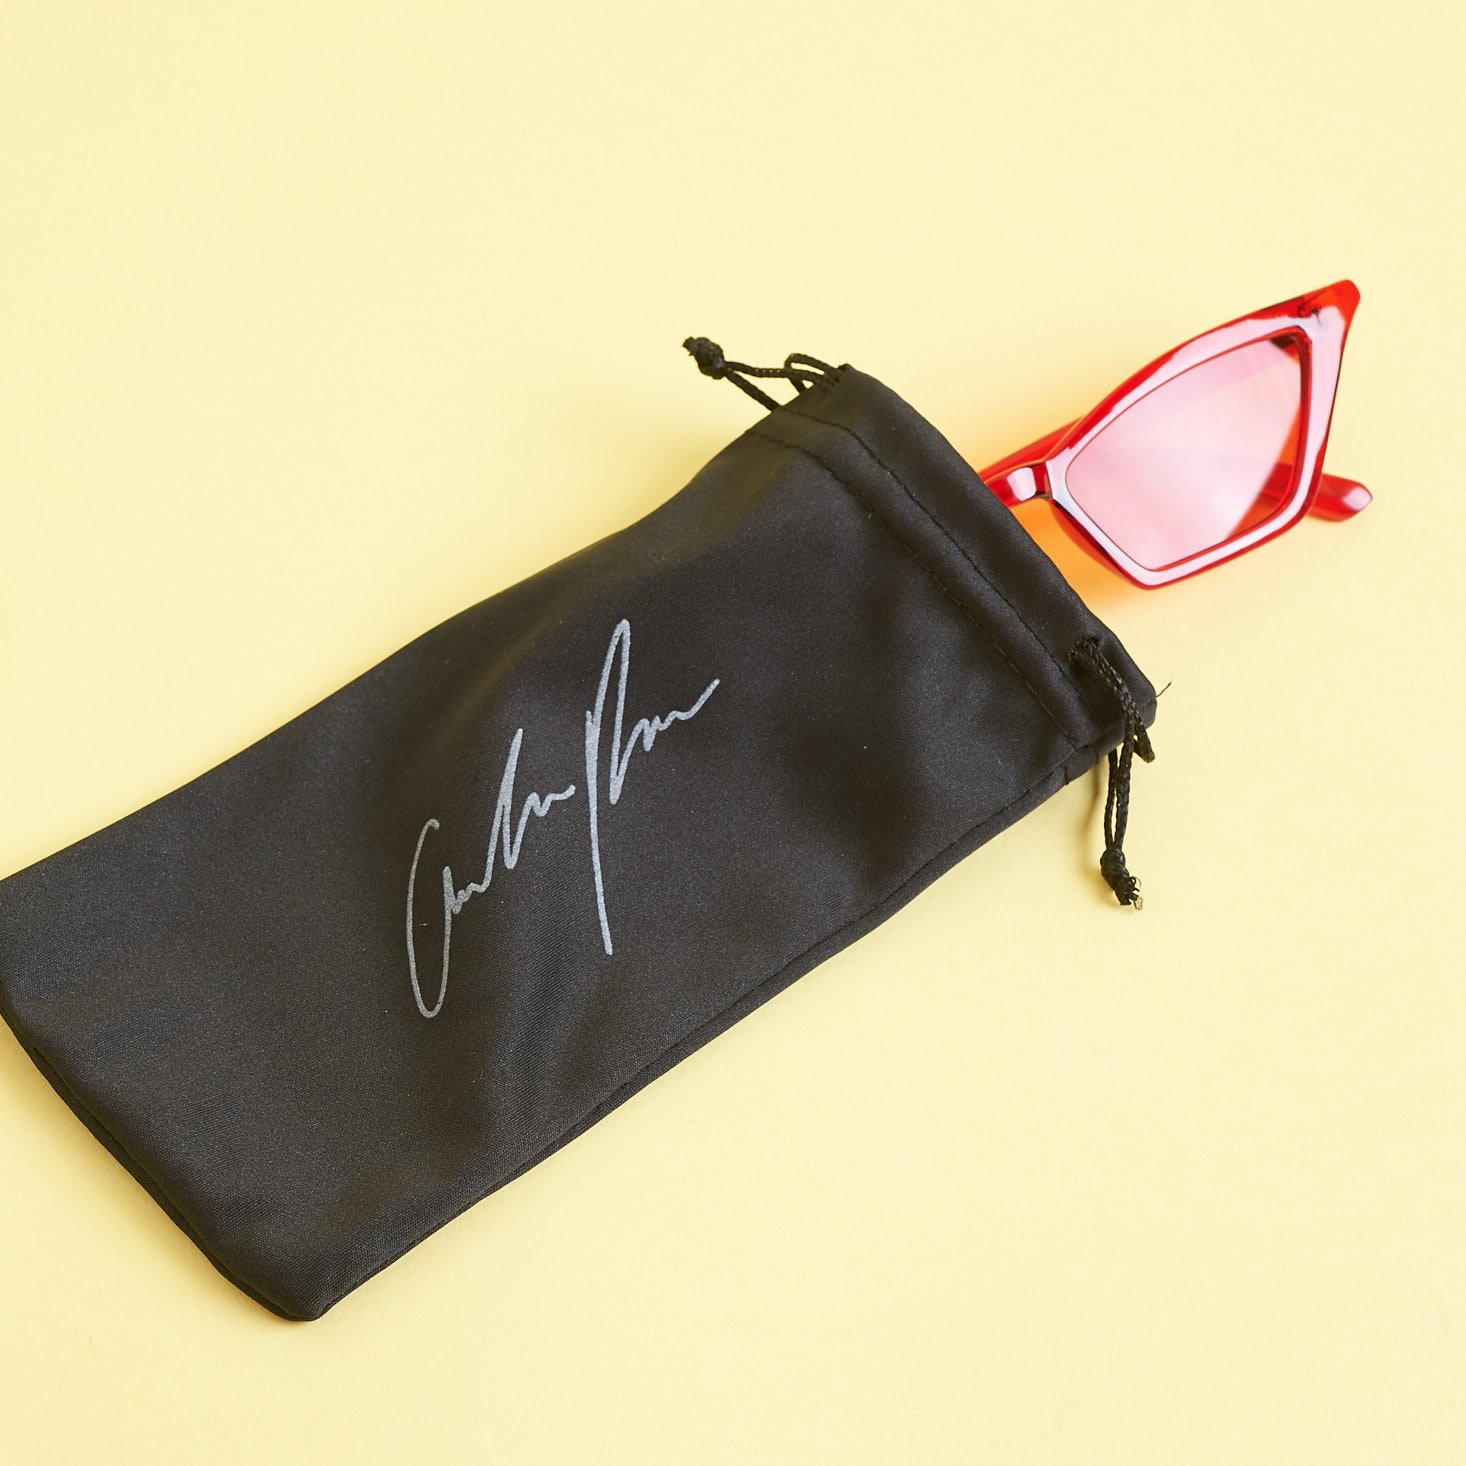 Amber Rose Sunglasses coming out of black pouch